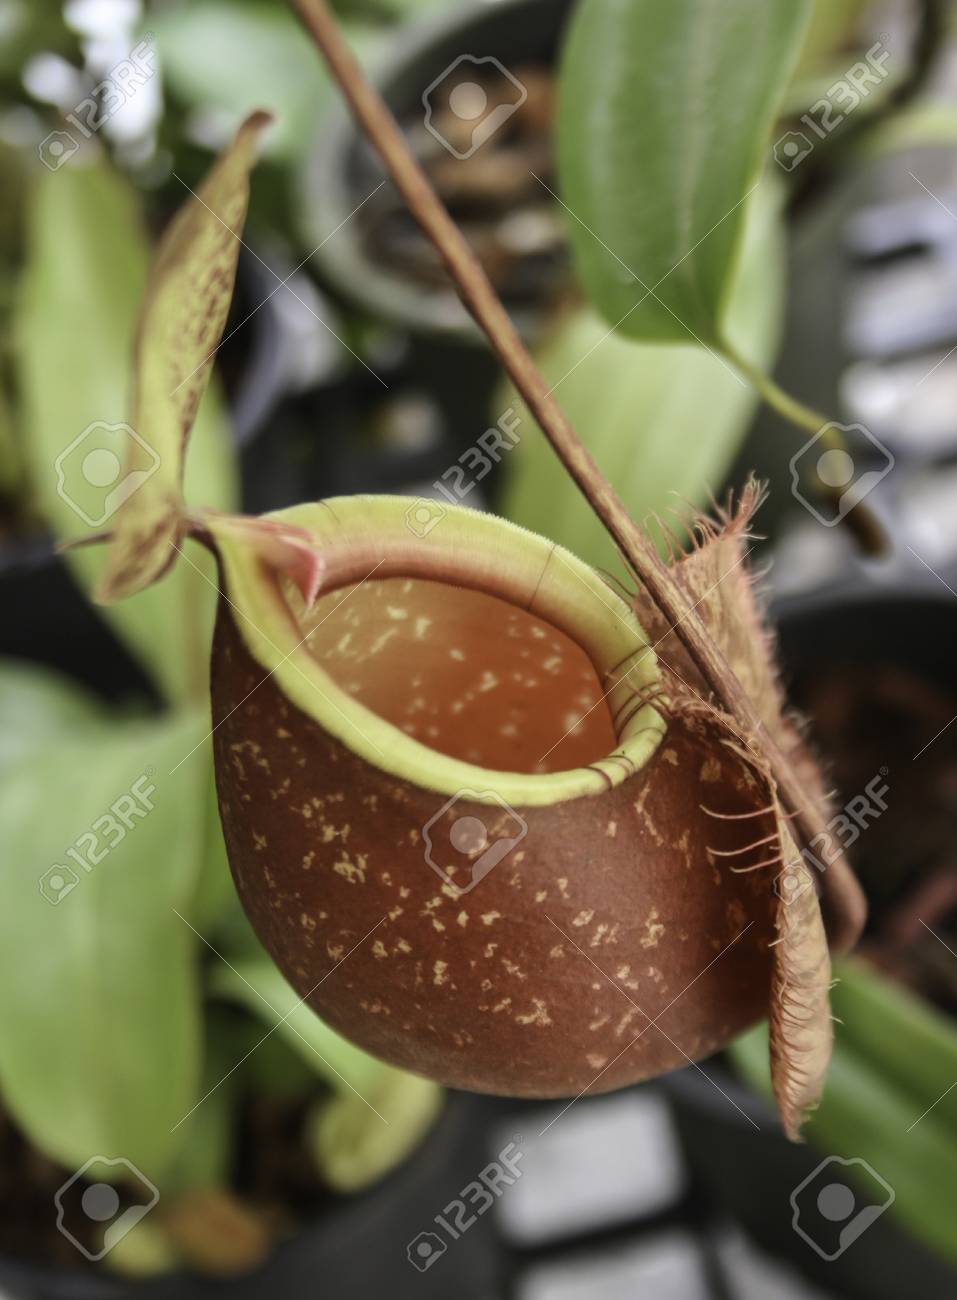 Best Closeup Of Nepenthes With Blurred Wallpaper Image